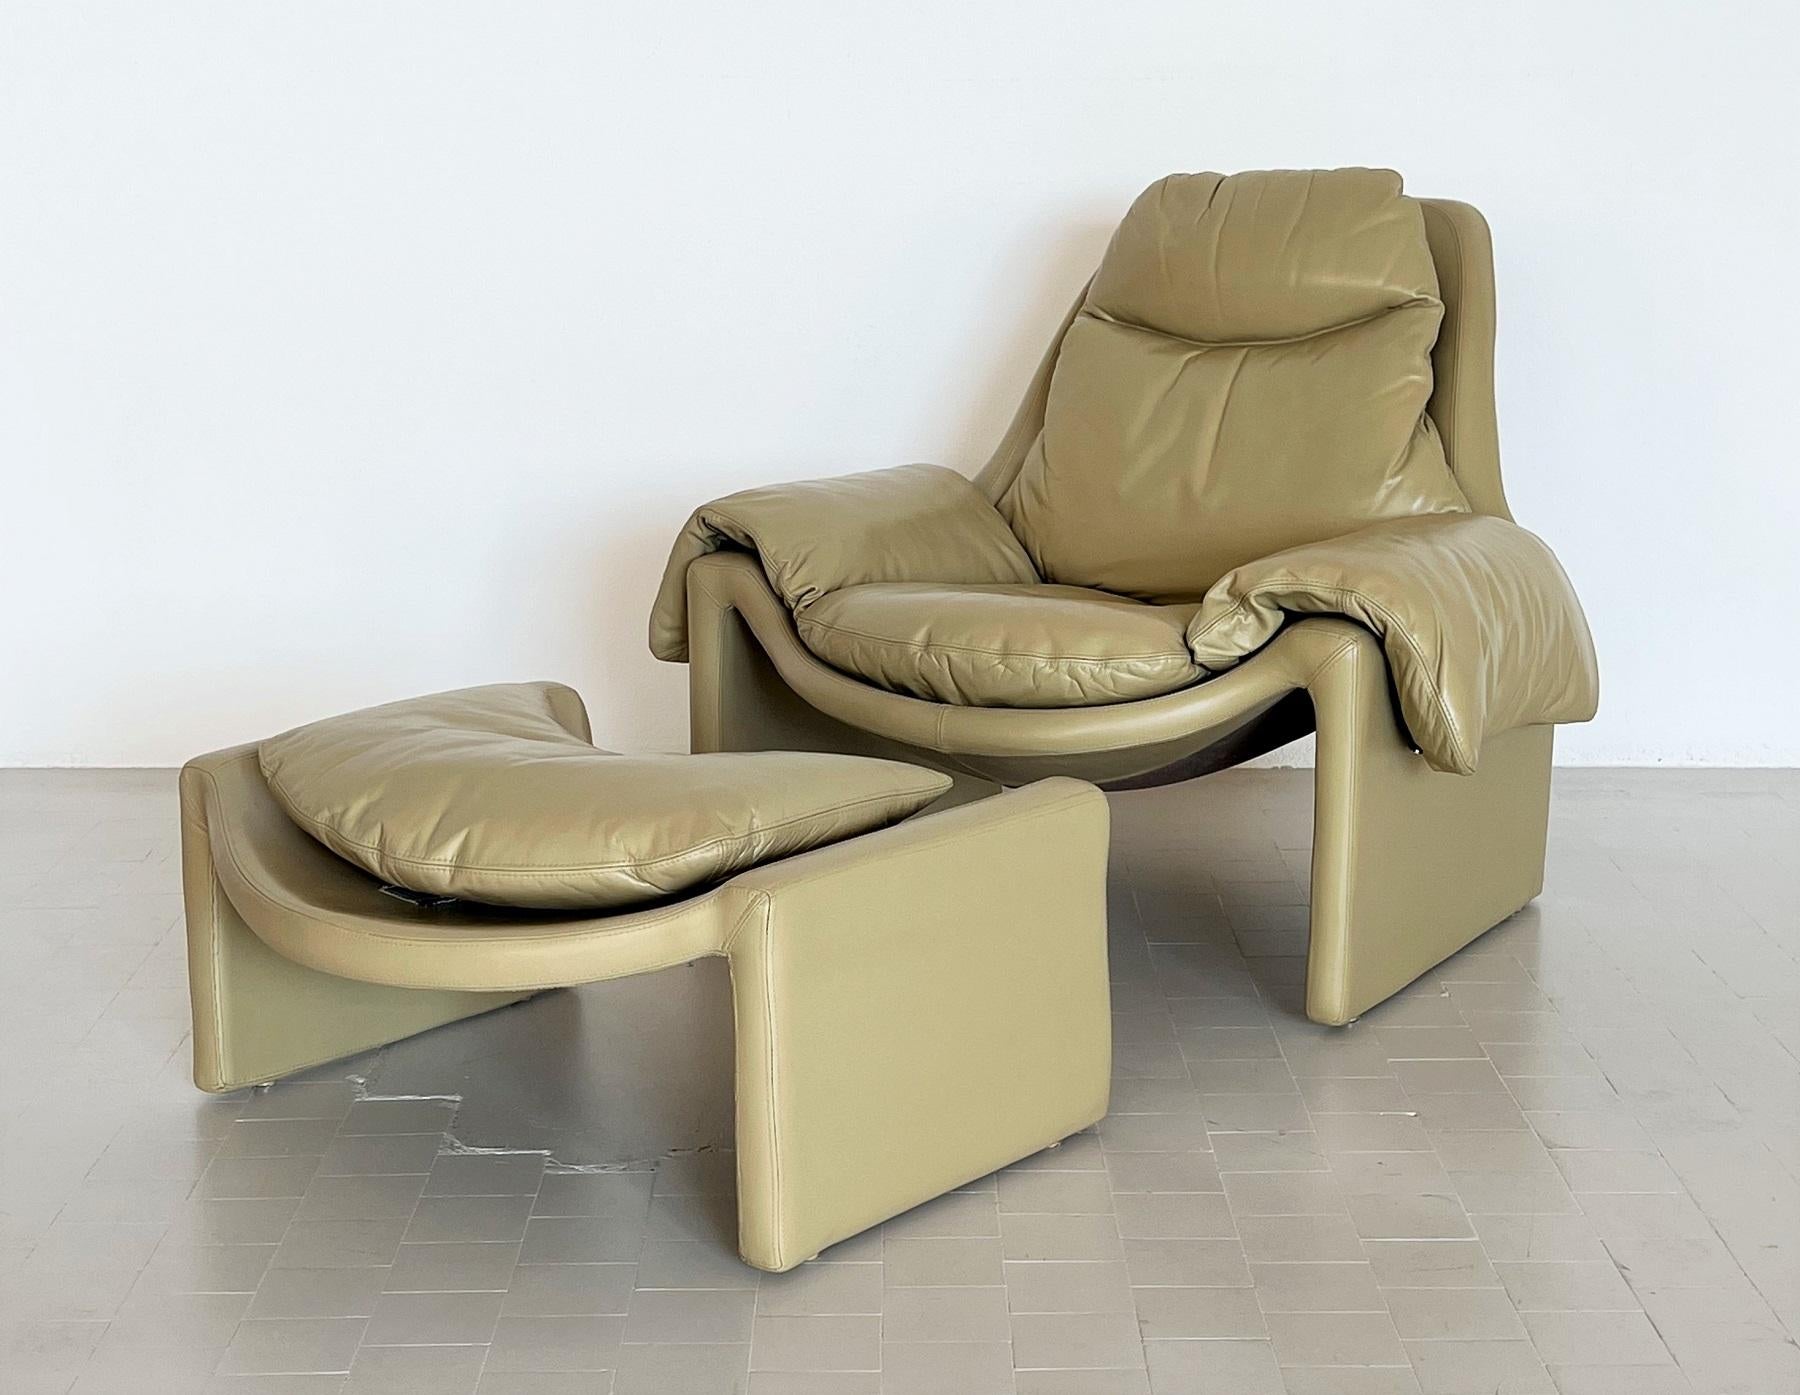 Vittorio Introini P60 Set of Lounge Chair with Ottoman for Saporiti, 1960s For Sale 1